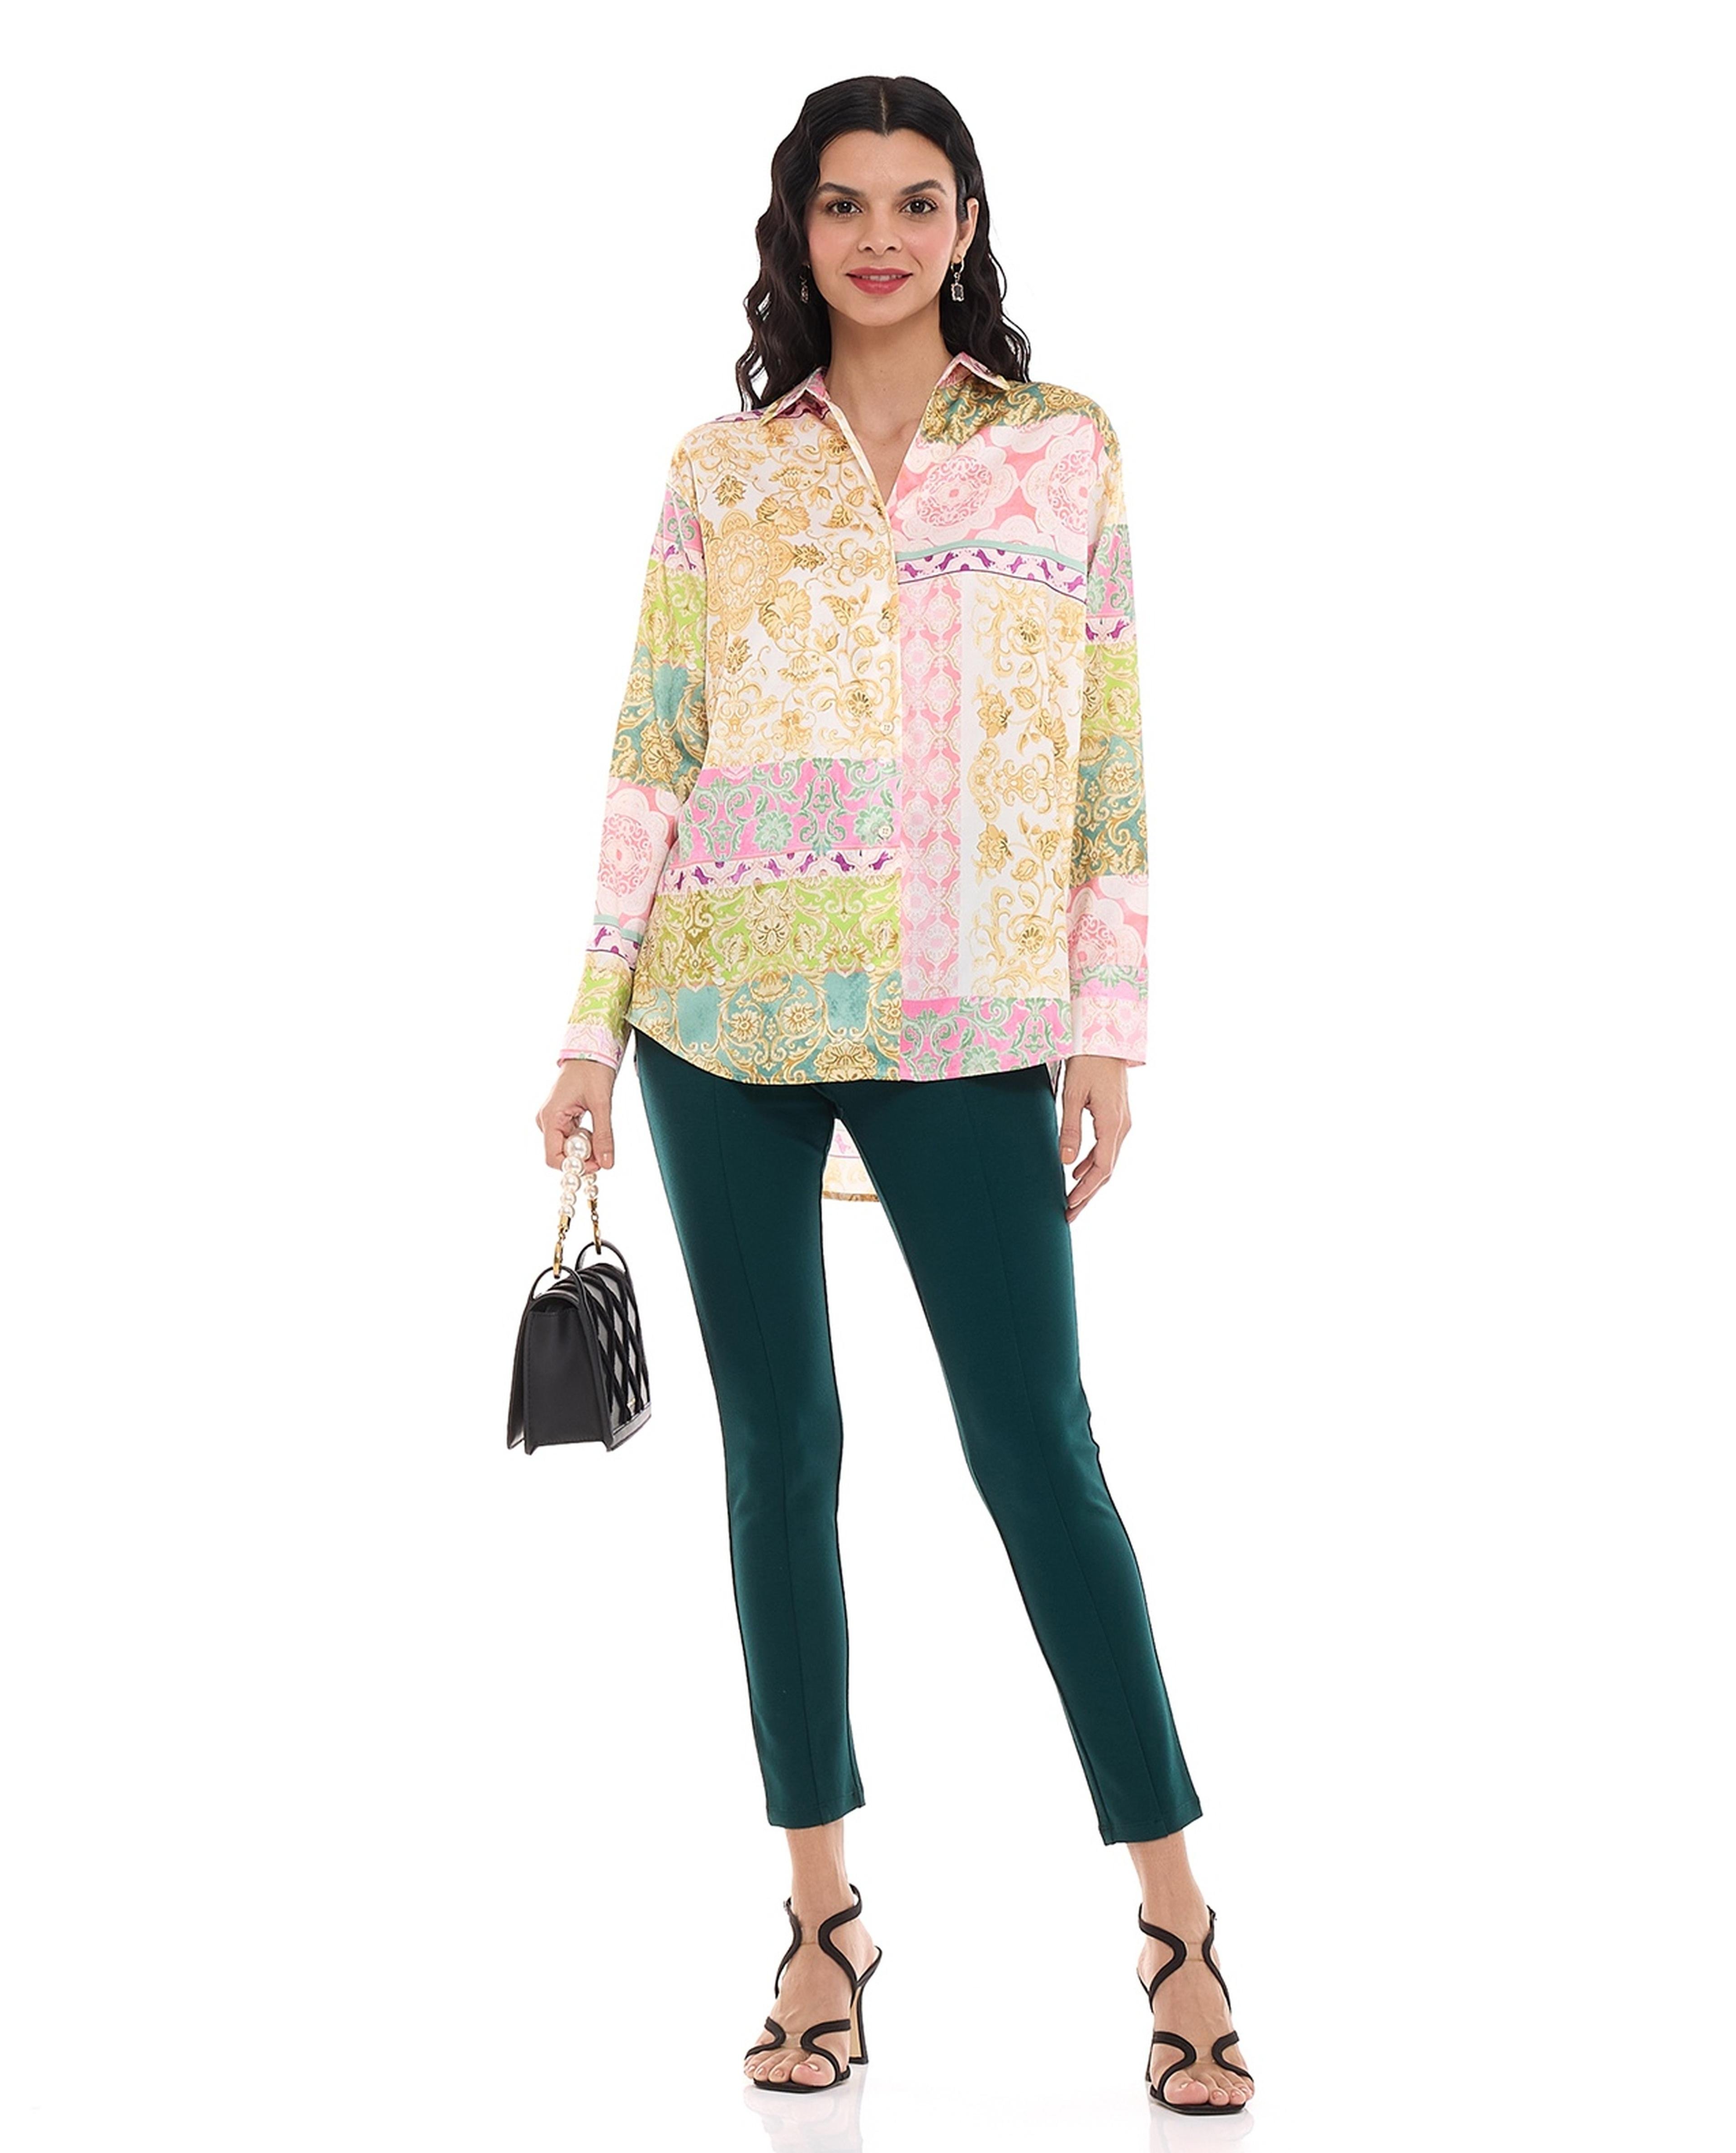 Ethnic Motif Printed Shirt with Classic Collar and Long Sleeves